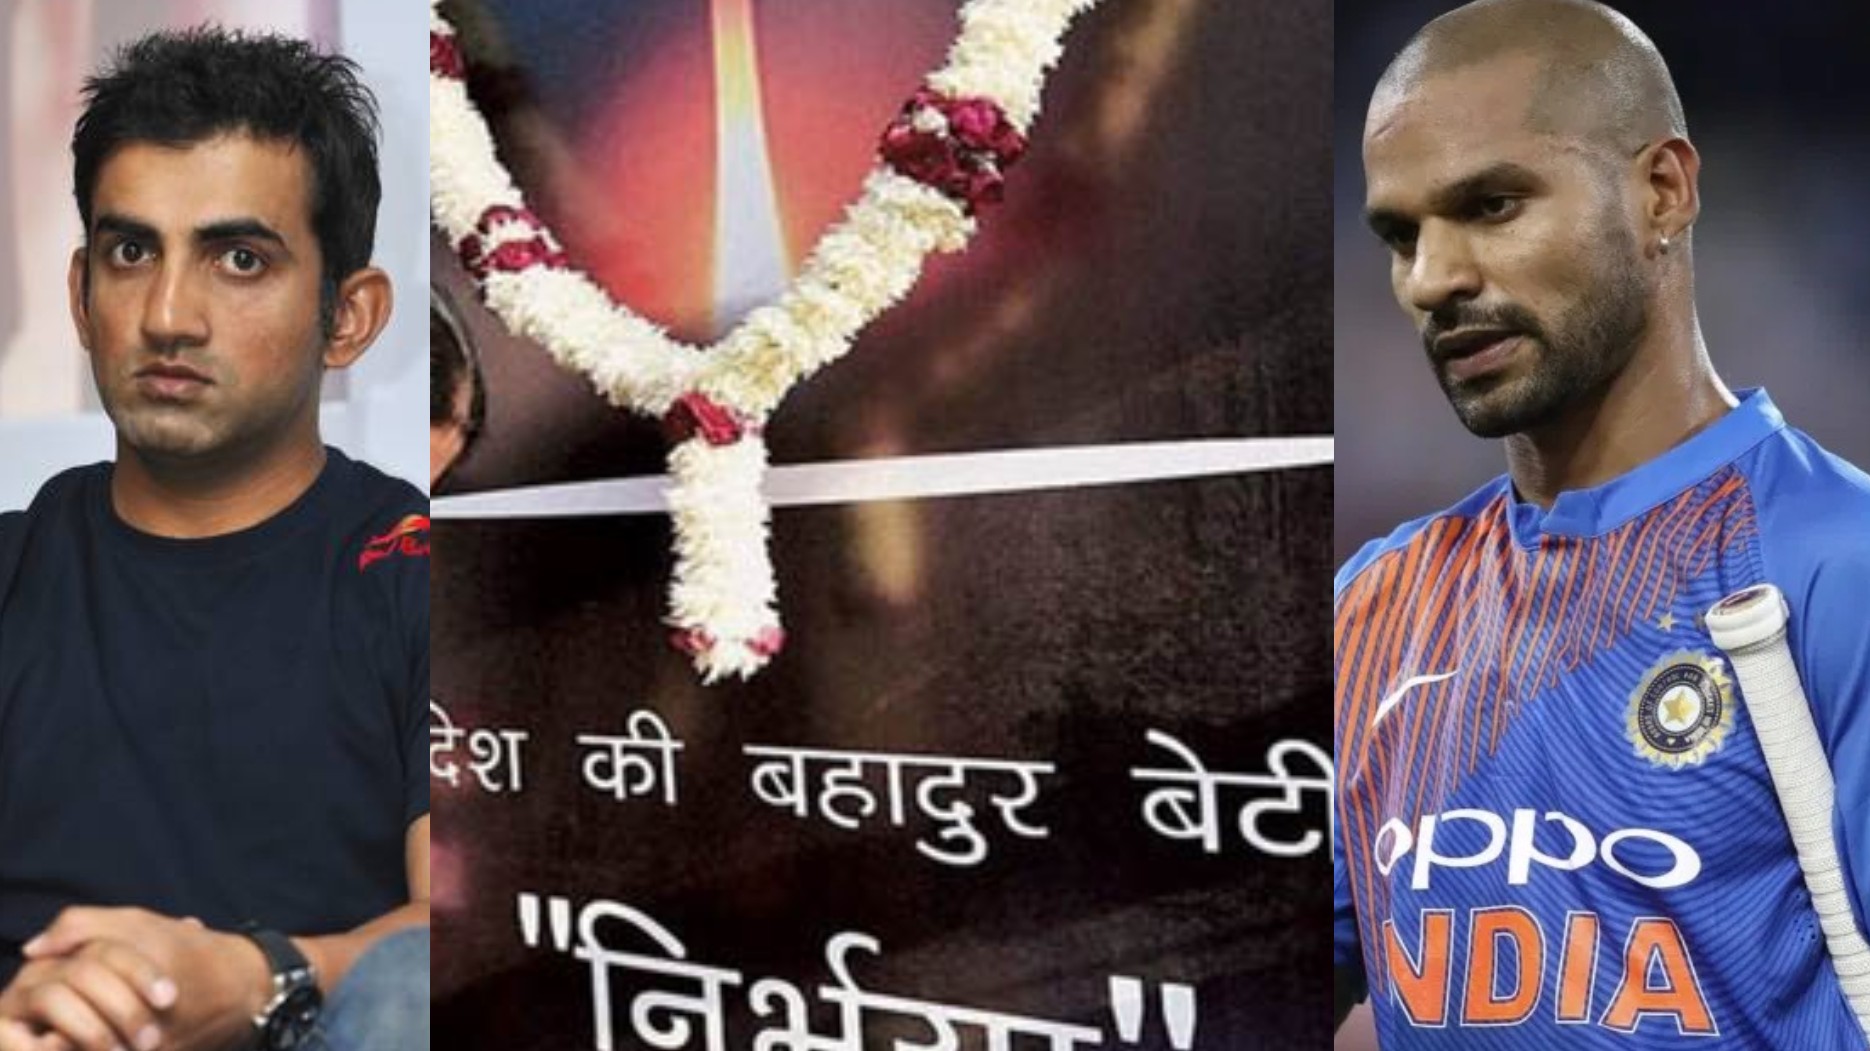 Indian cricket fraternity reacts after all four rapists of Nirbhaya hanged in Tihar Jail